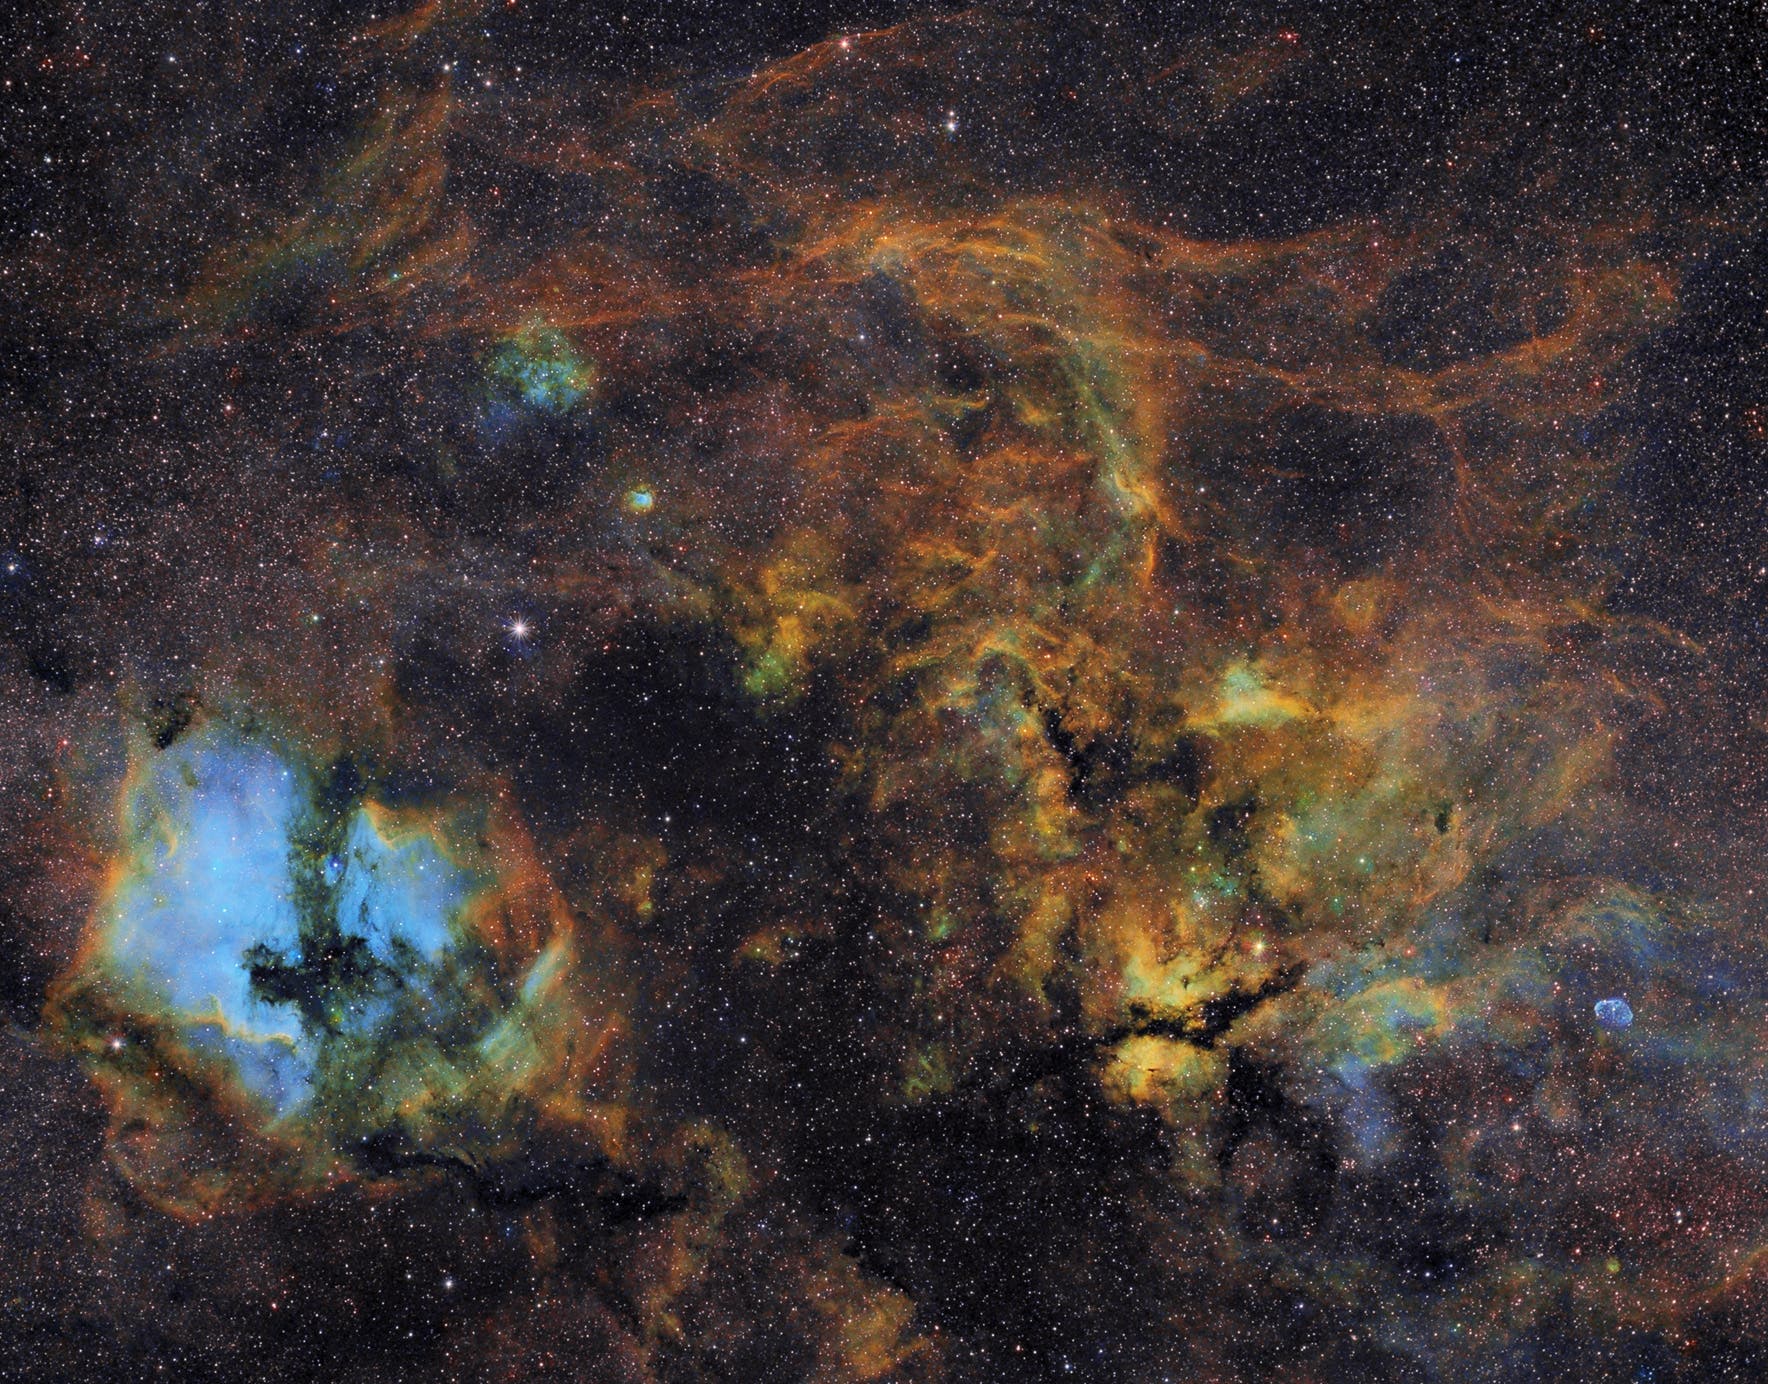 Cygnus widefield from North America to "Great Britain"